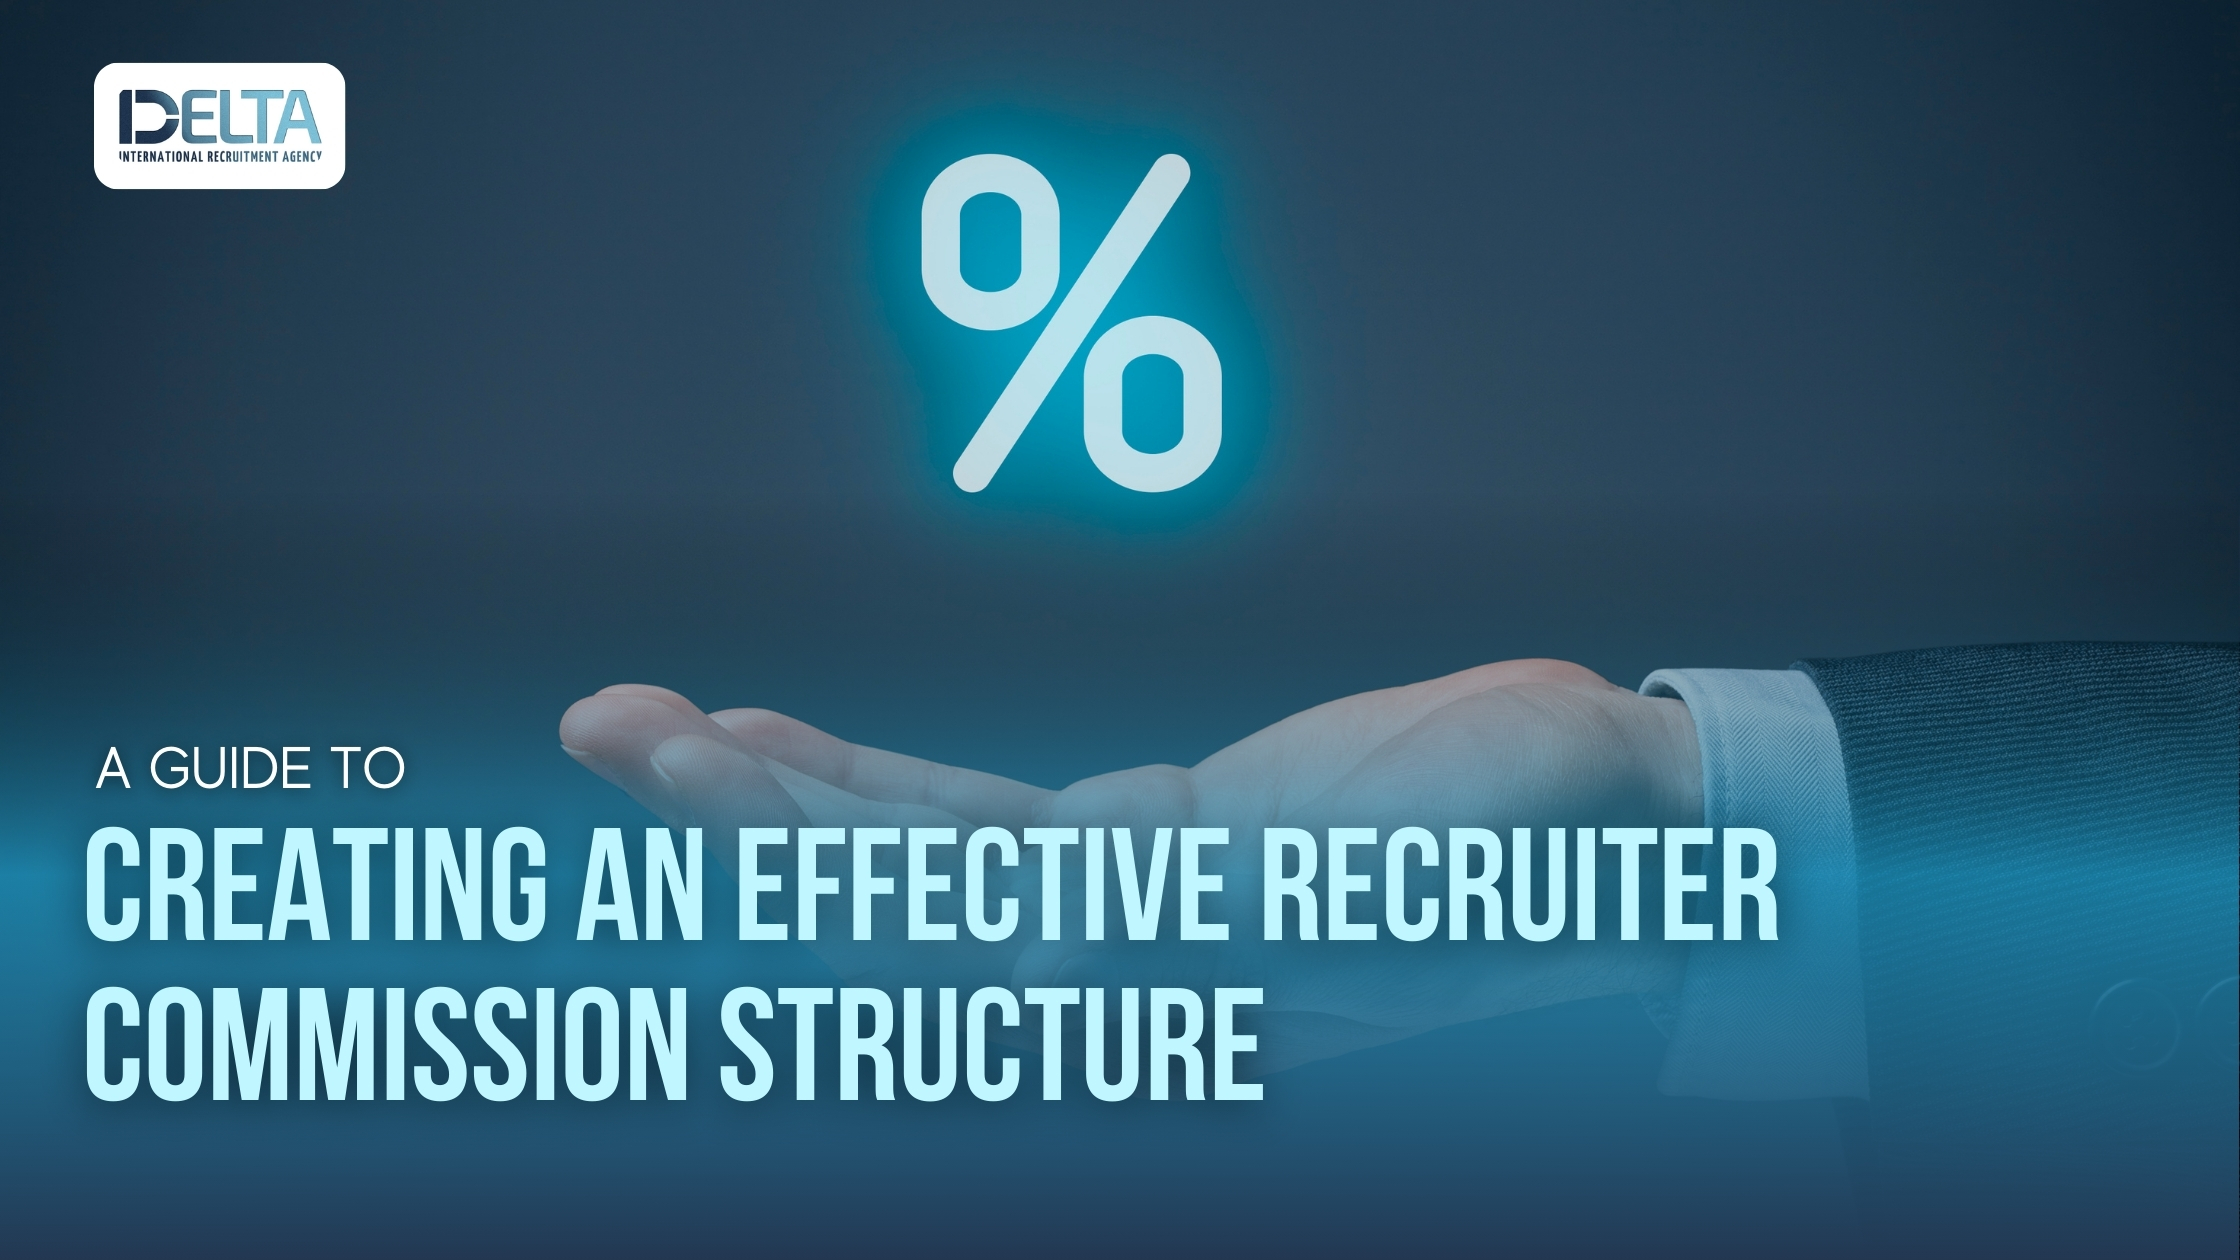 A Guide to Creating an Effective Recruiter Commission Structure